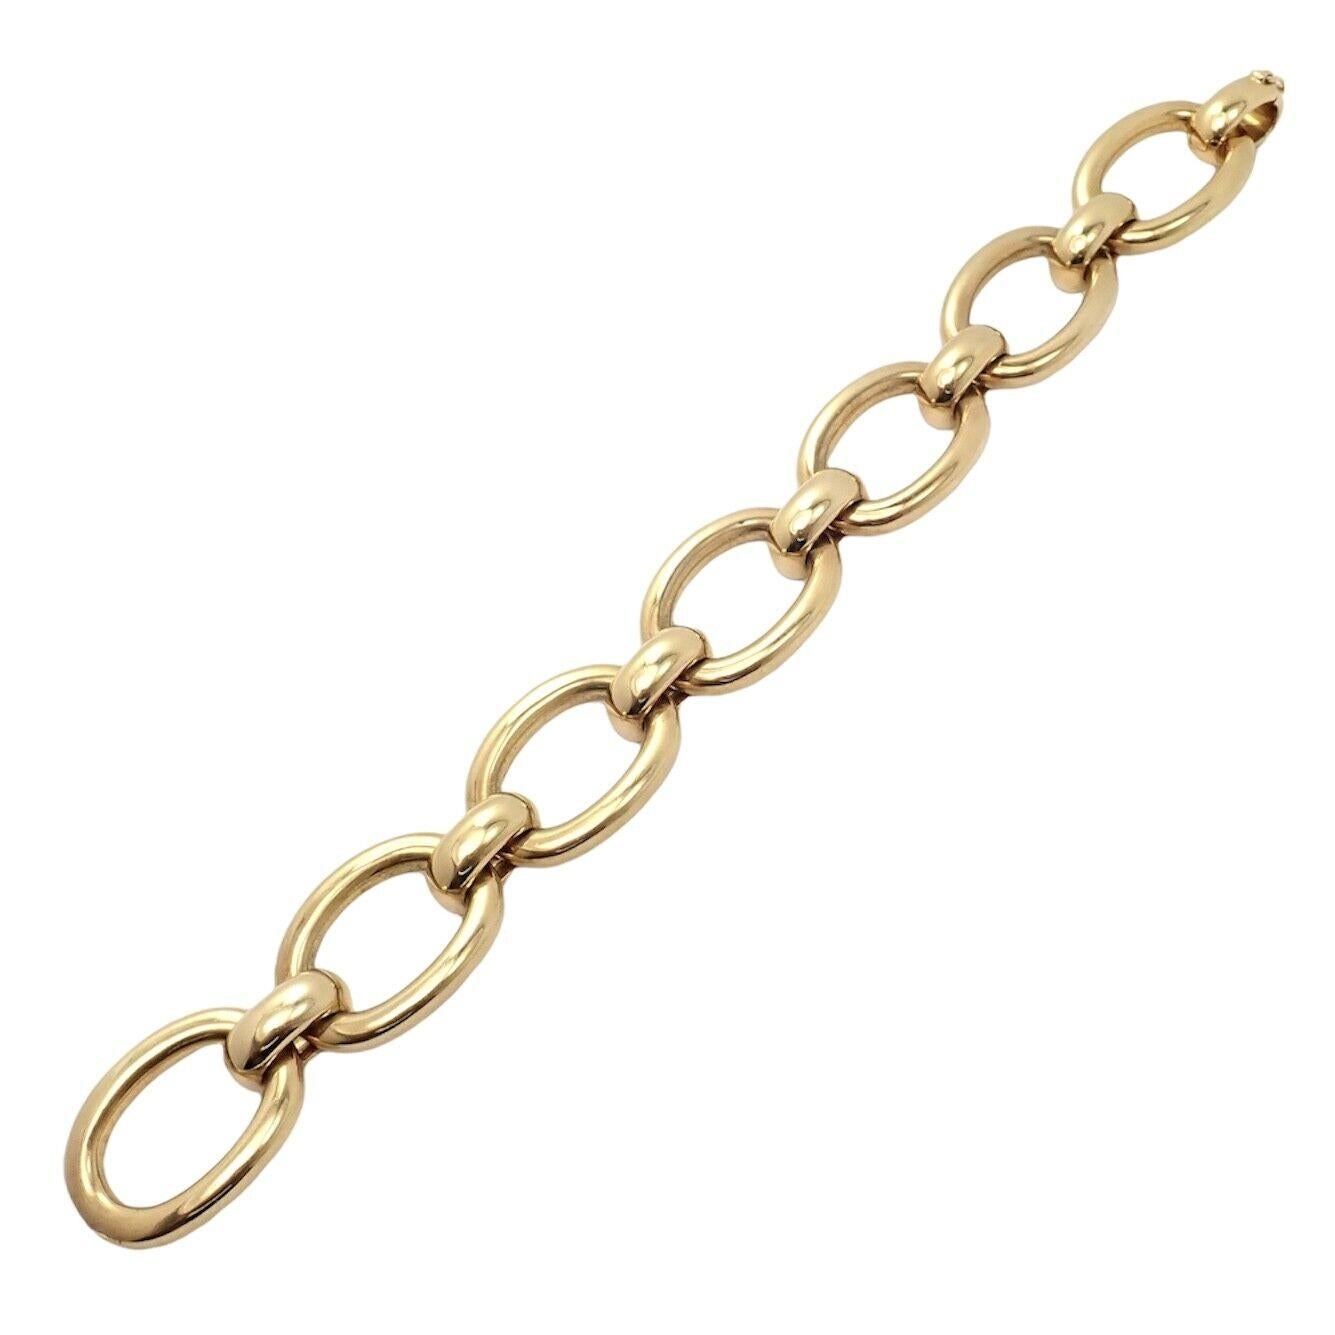 18k Yellow Gold Large Oval Link Bracelet by Cartier. 
Details: 
Length: 8 1/4